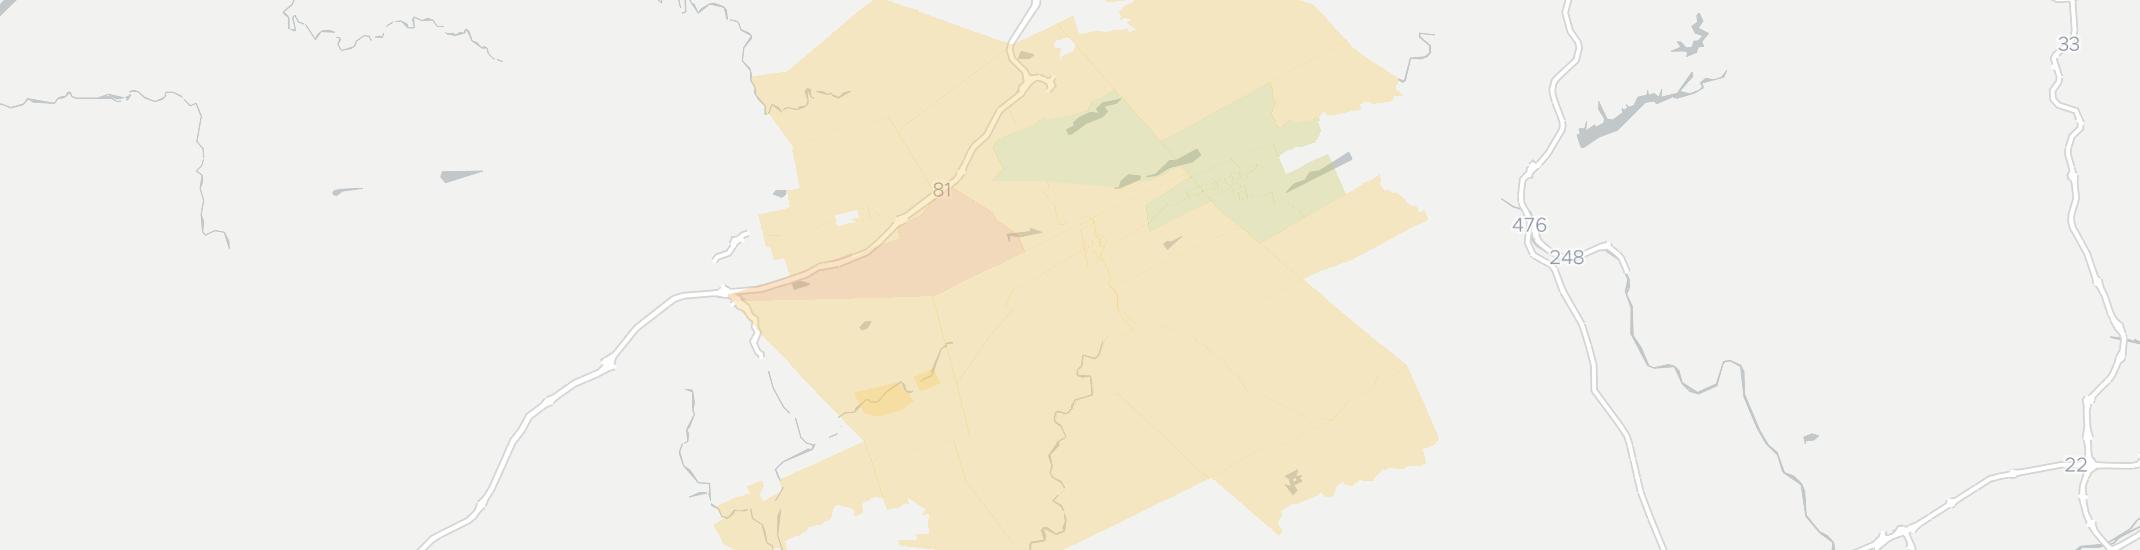 Tamaqua Internet Competition Map. Click for interactive map